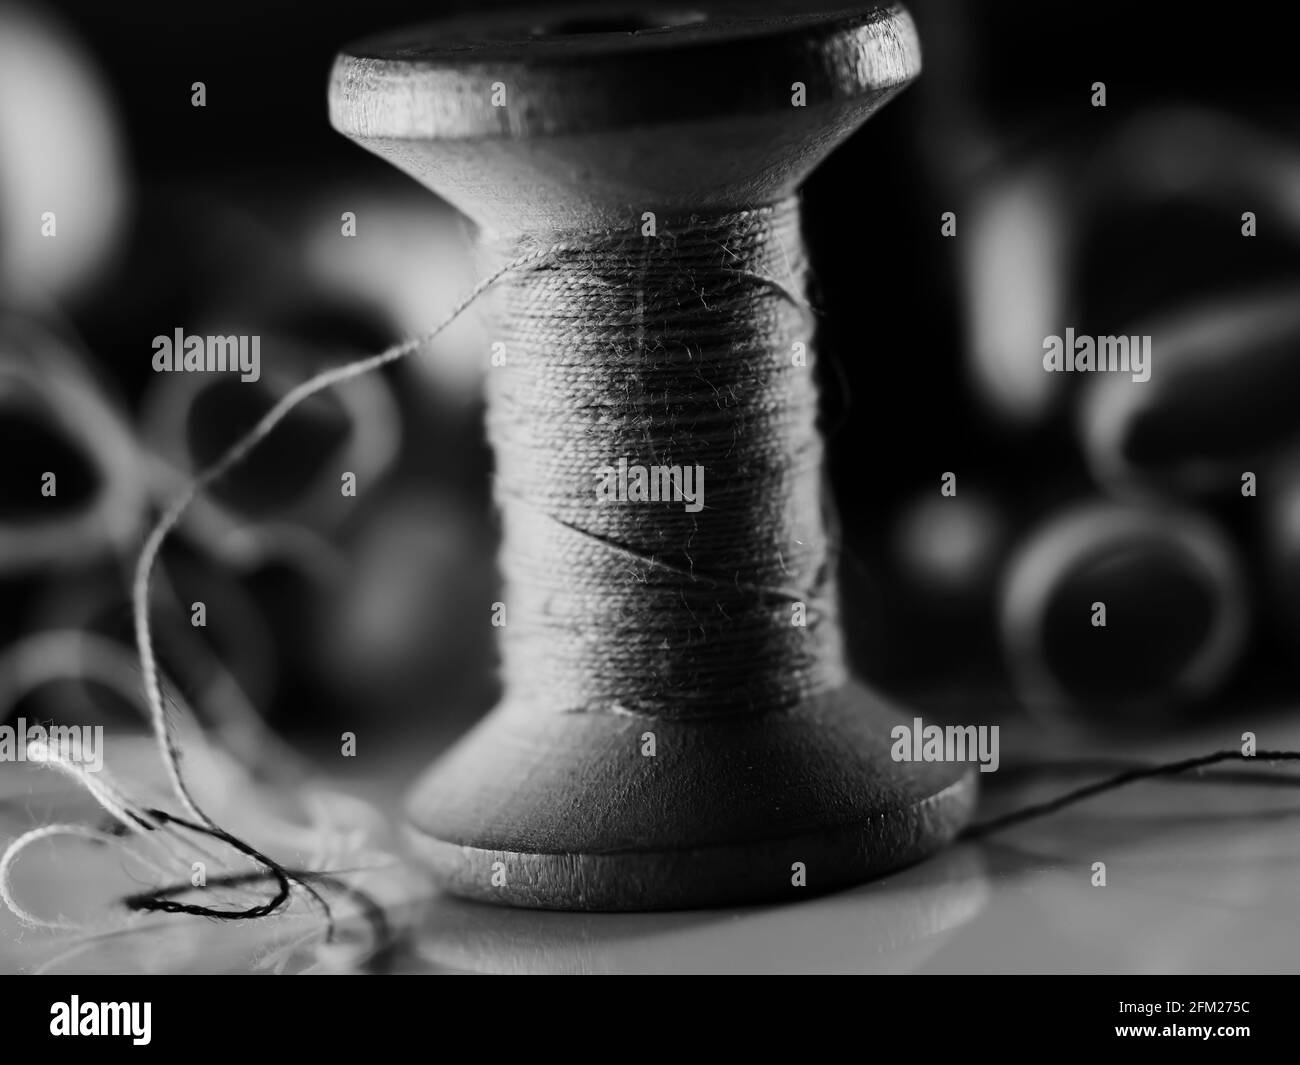 Sewing needle Black and White Stock Photos & Images - Alamy